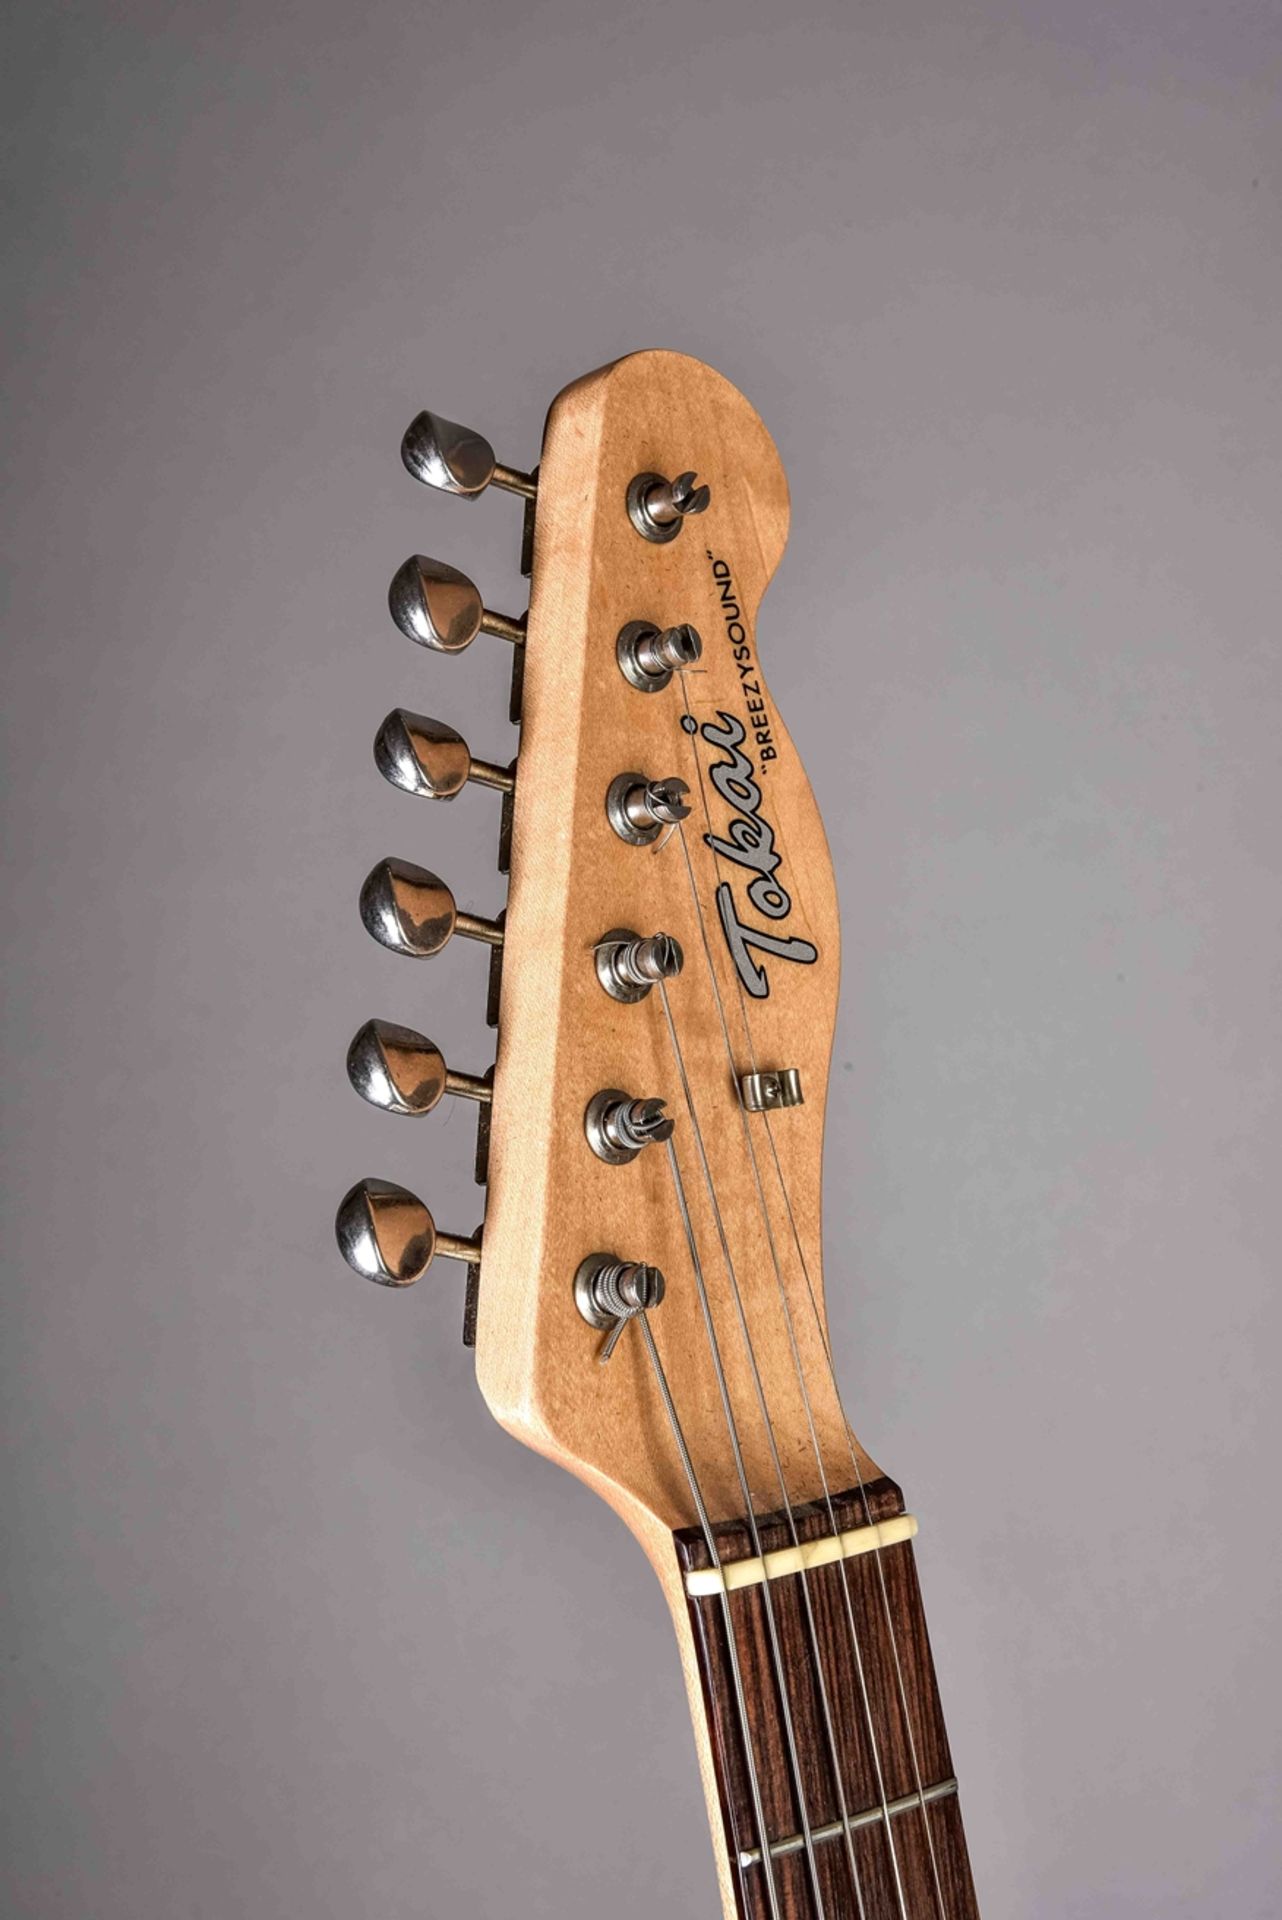 Electric guitar, Tokai "Breezysound" (Tele). Light brown, black rimmed sunburst solid body with whi - Image 7 of 14